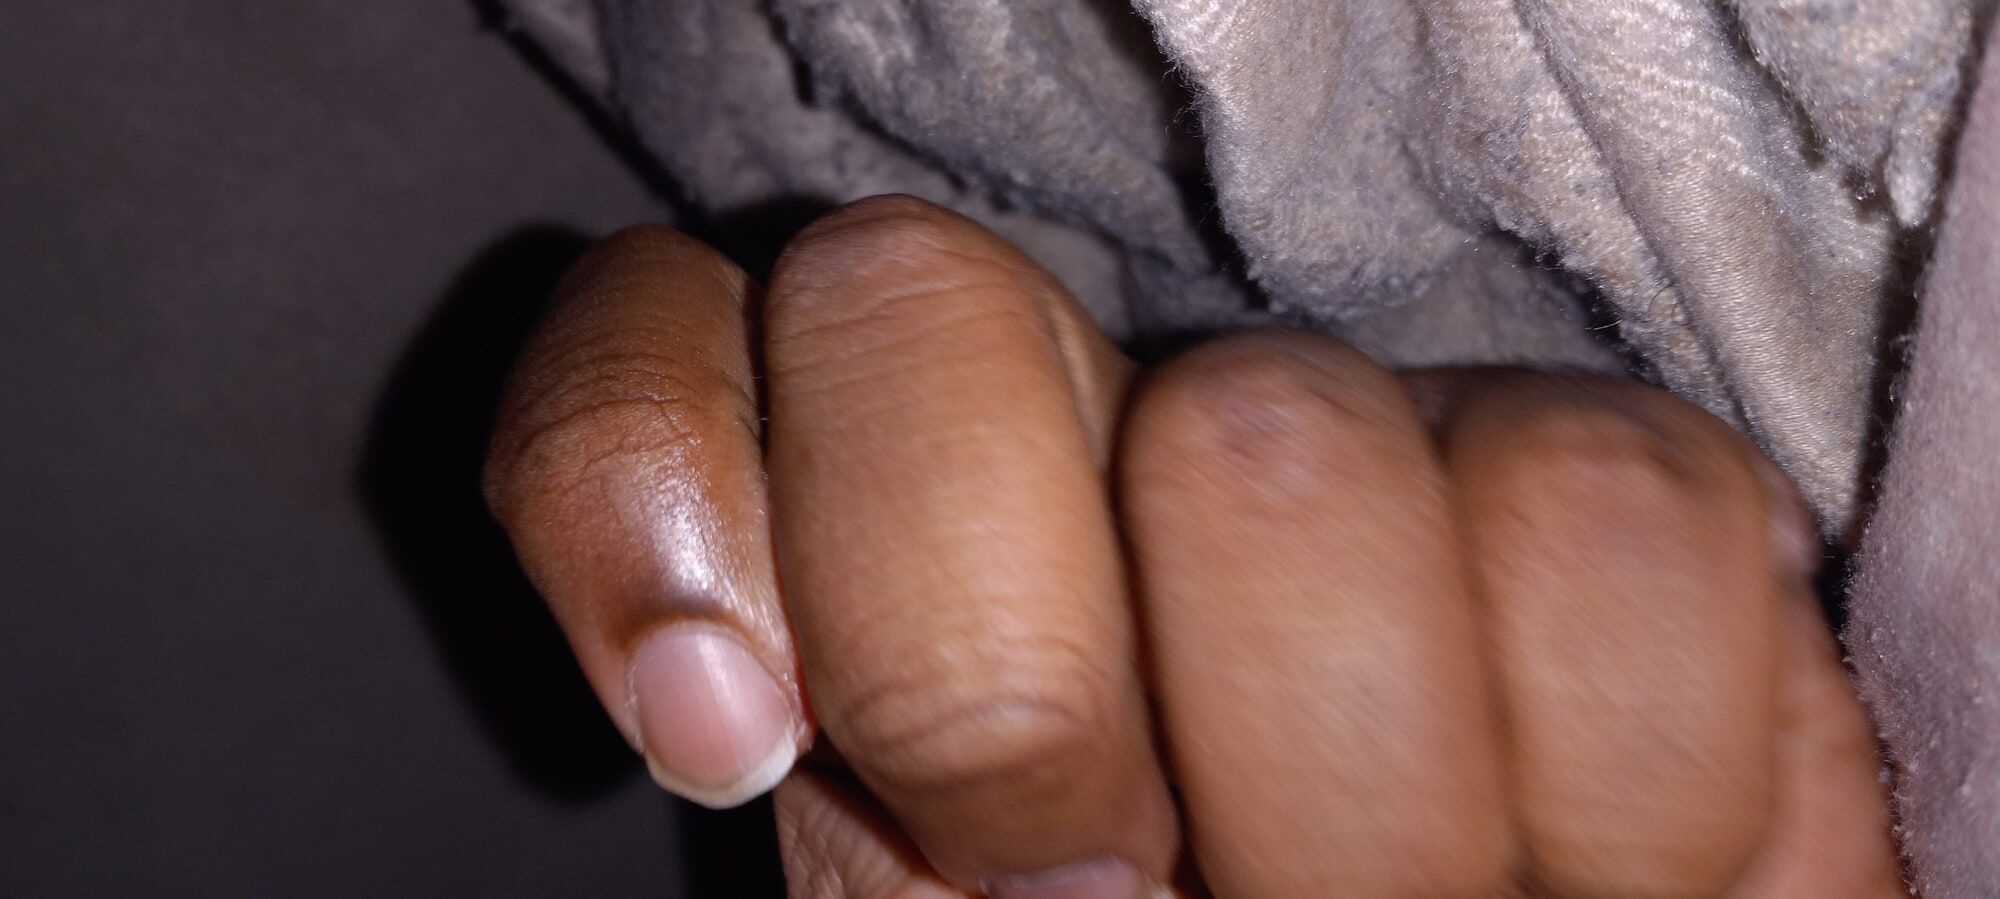 Cum on my thumb and wet on my hands from masturbation #2